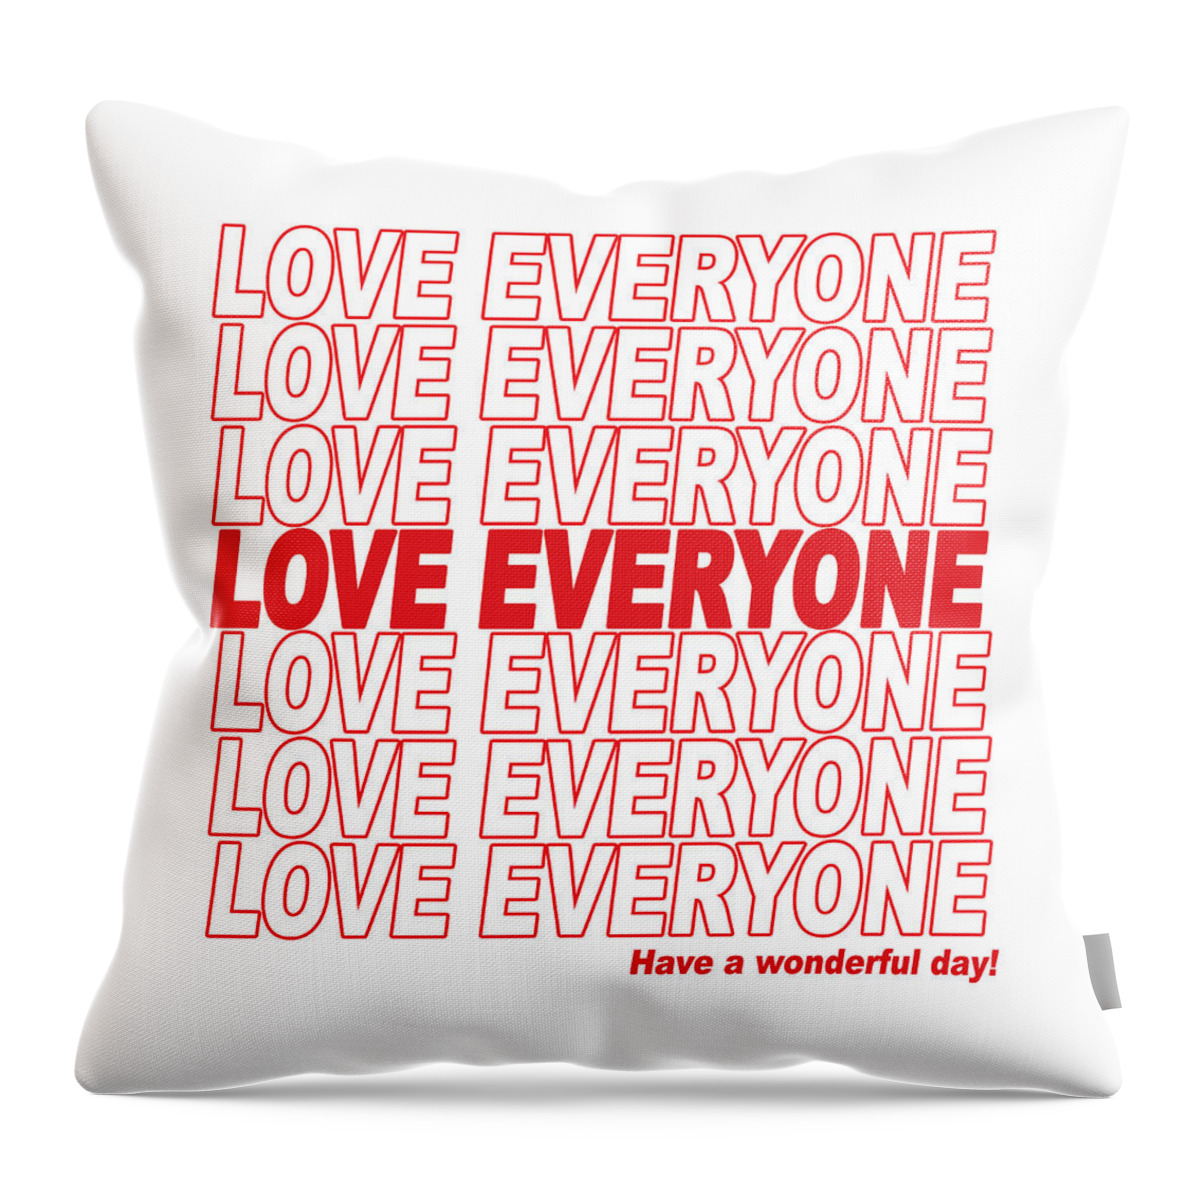 Love Everyone Throw Pillow featuring the digital art Love Everyone - Have a Wonderful Day by Ginny Gaura